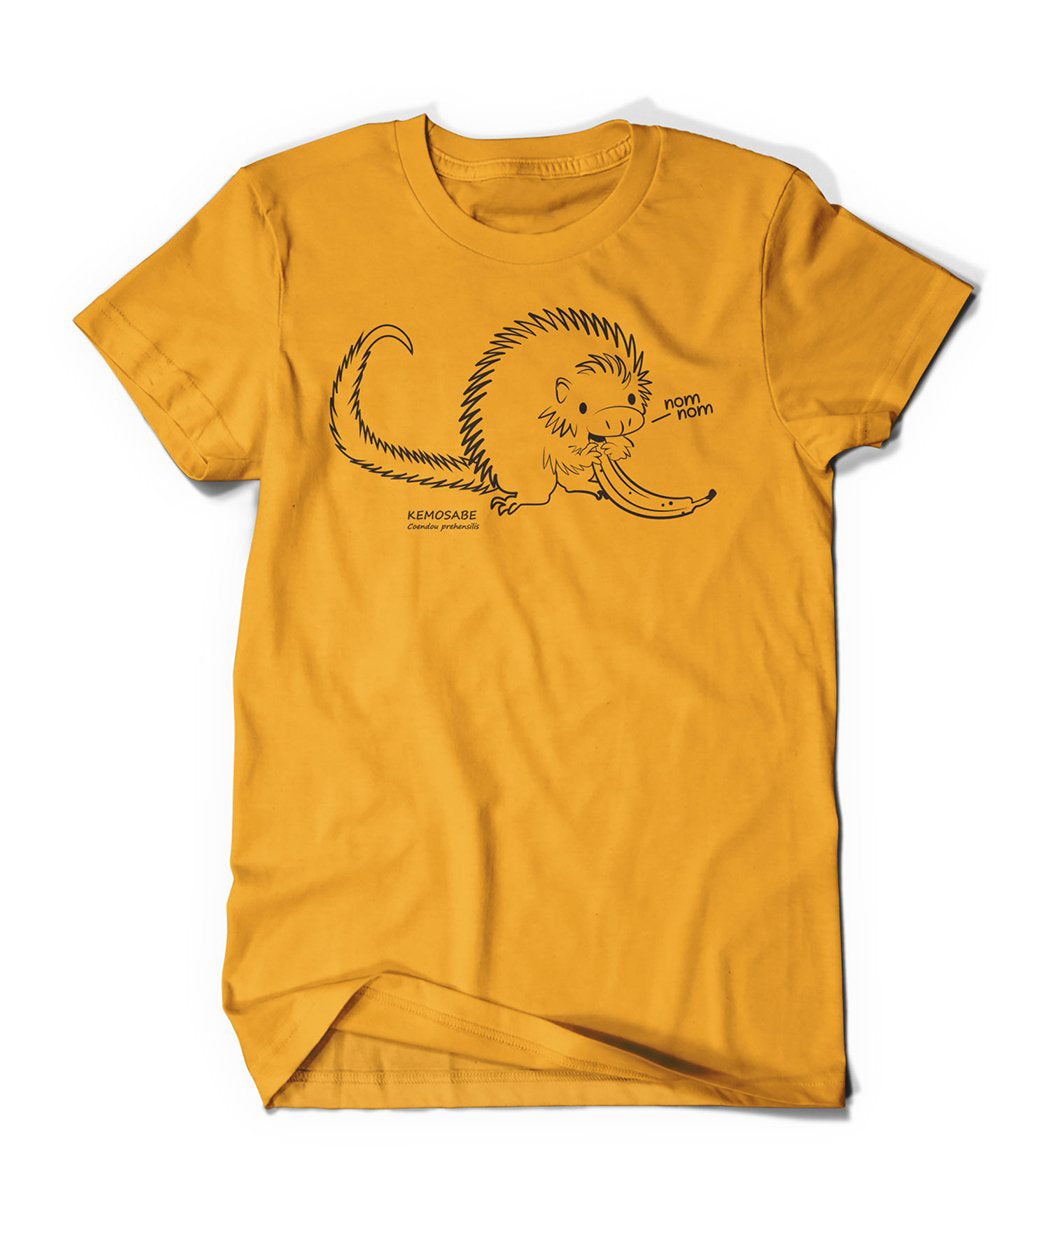 Yellow shirt with cartoon, black line drawing of porcupine eating a banana all with yellow fill. 